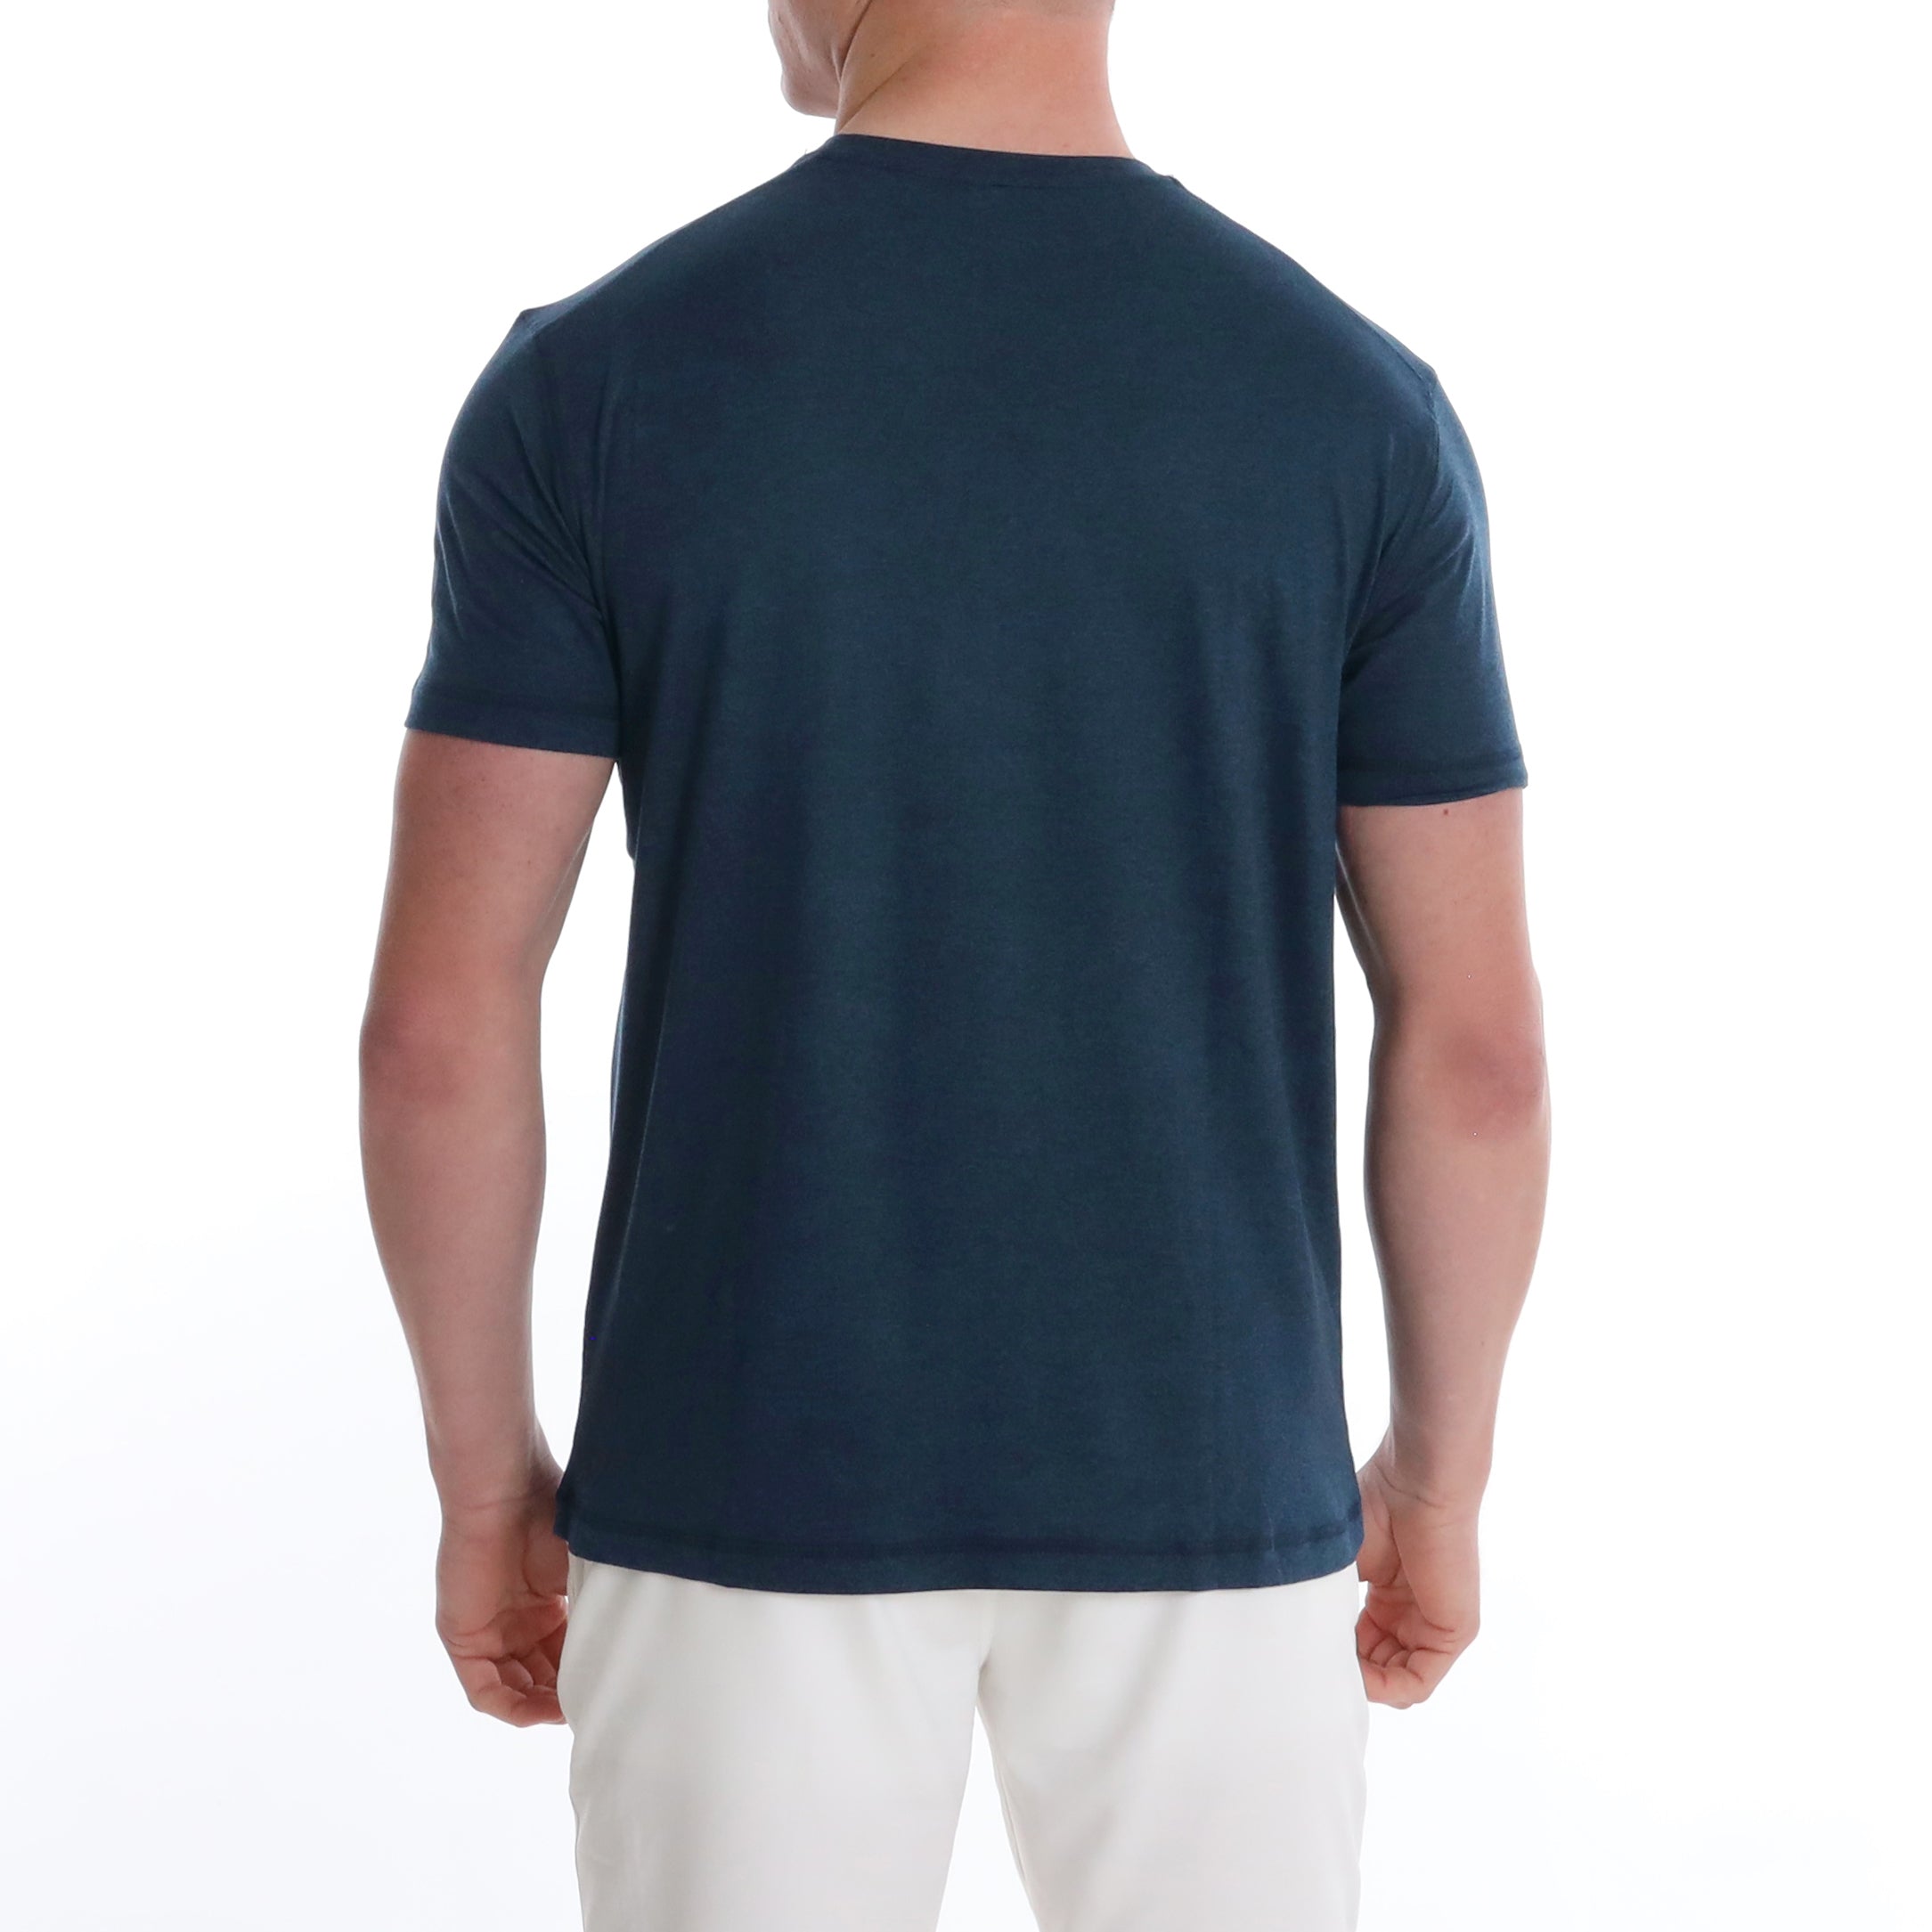 BUTTER T LOOPER SILHOUETTE - NAVY HEATHER